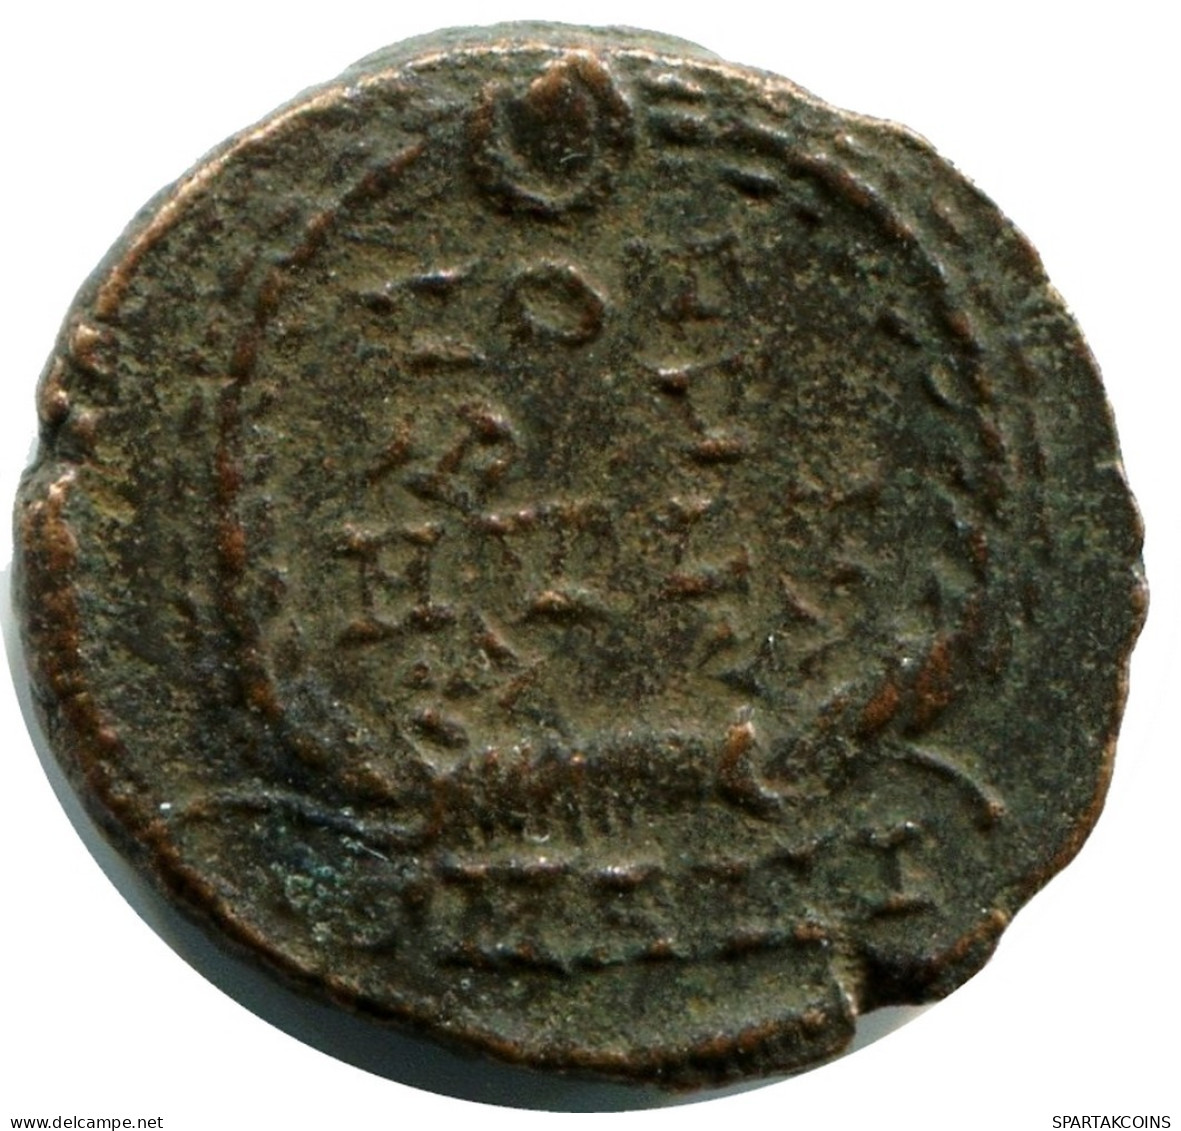 CONSTANS MINTED IN ANTIOCH FROM THE ROYAL ONTARIO MUSEUM #ANC11834.14.D.A - L'Empire Chrétien (307 à 363)